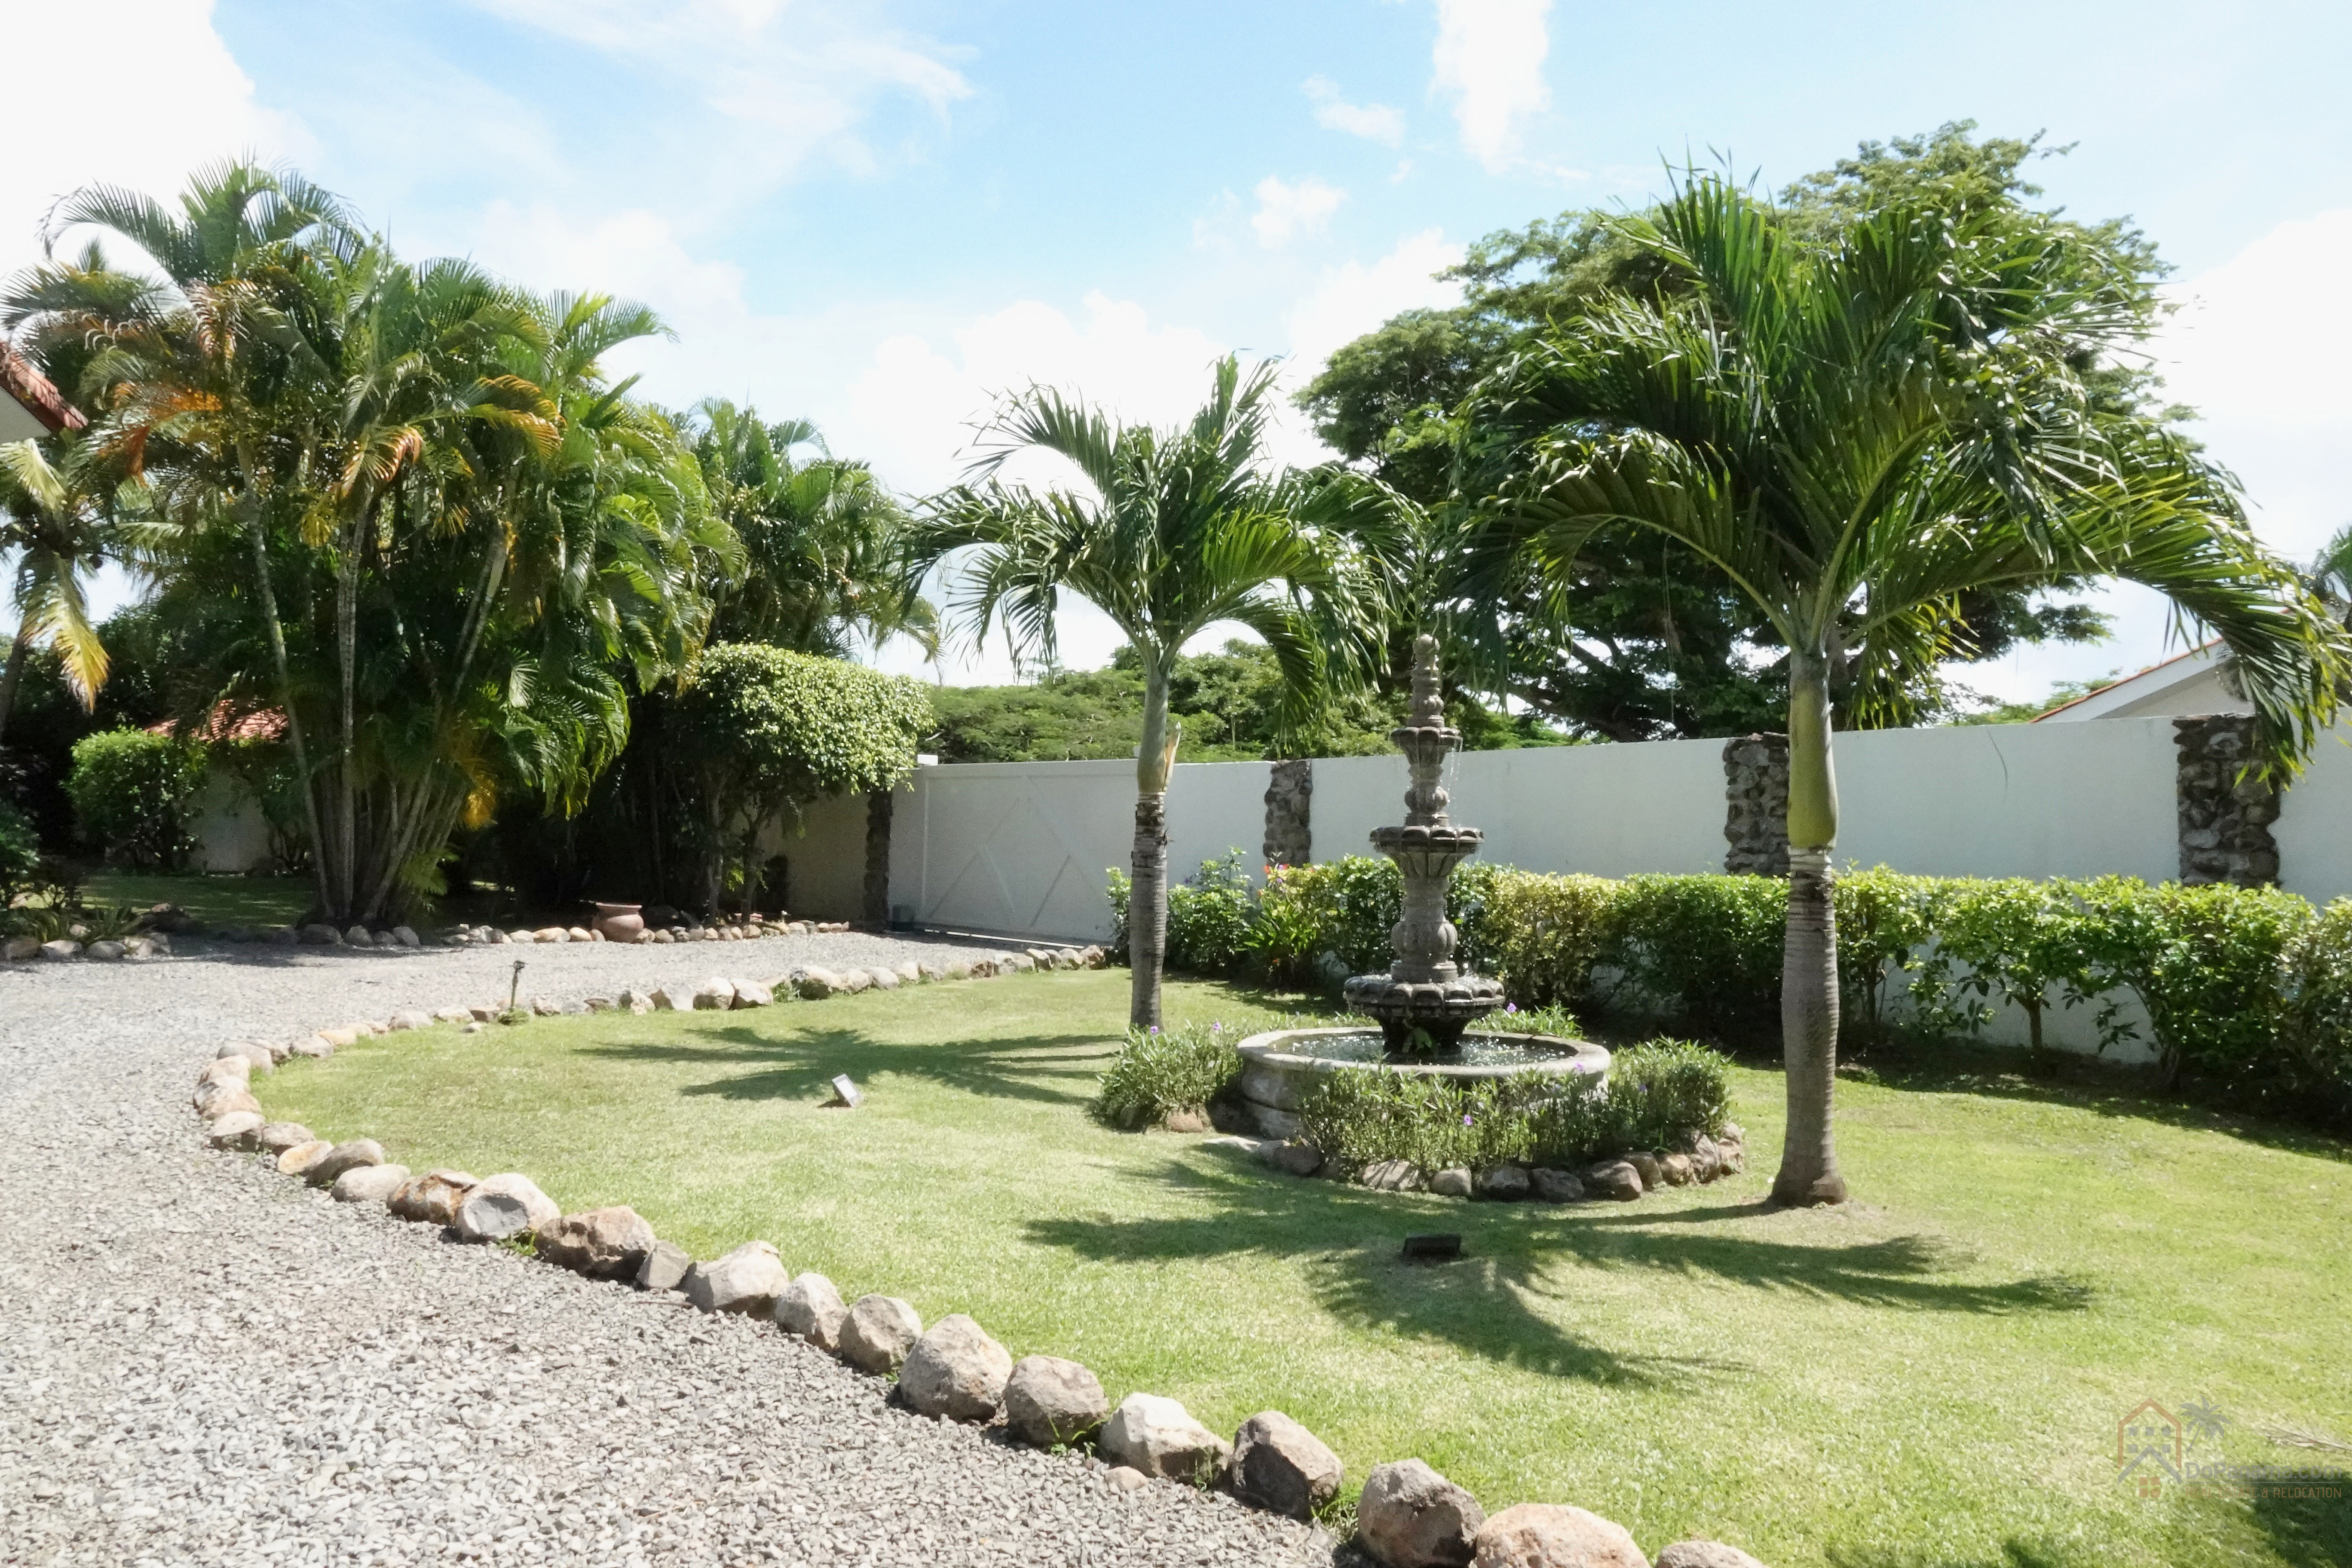 Luxurious 3-Bedroom Beachside Villa in Punta Barco, Panama – Private Pool & Expansive Gardens